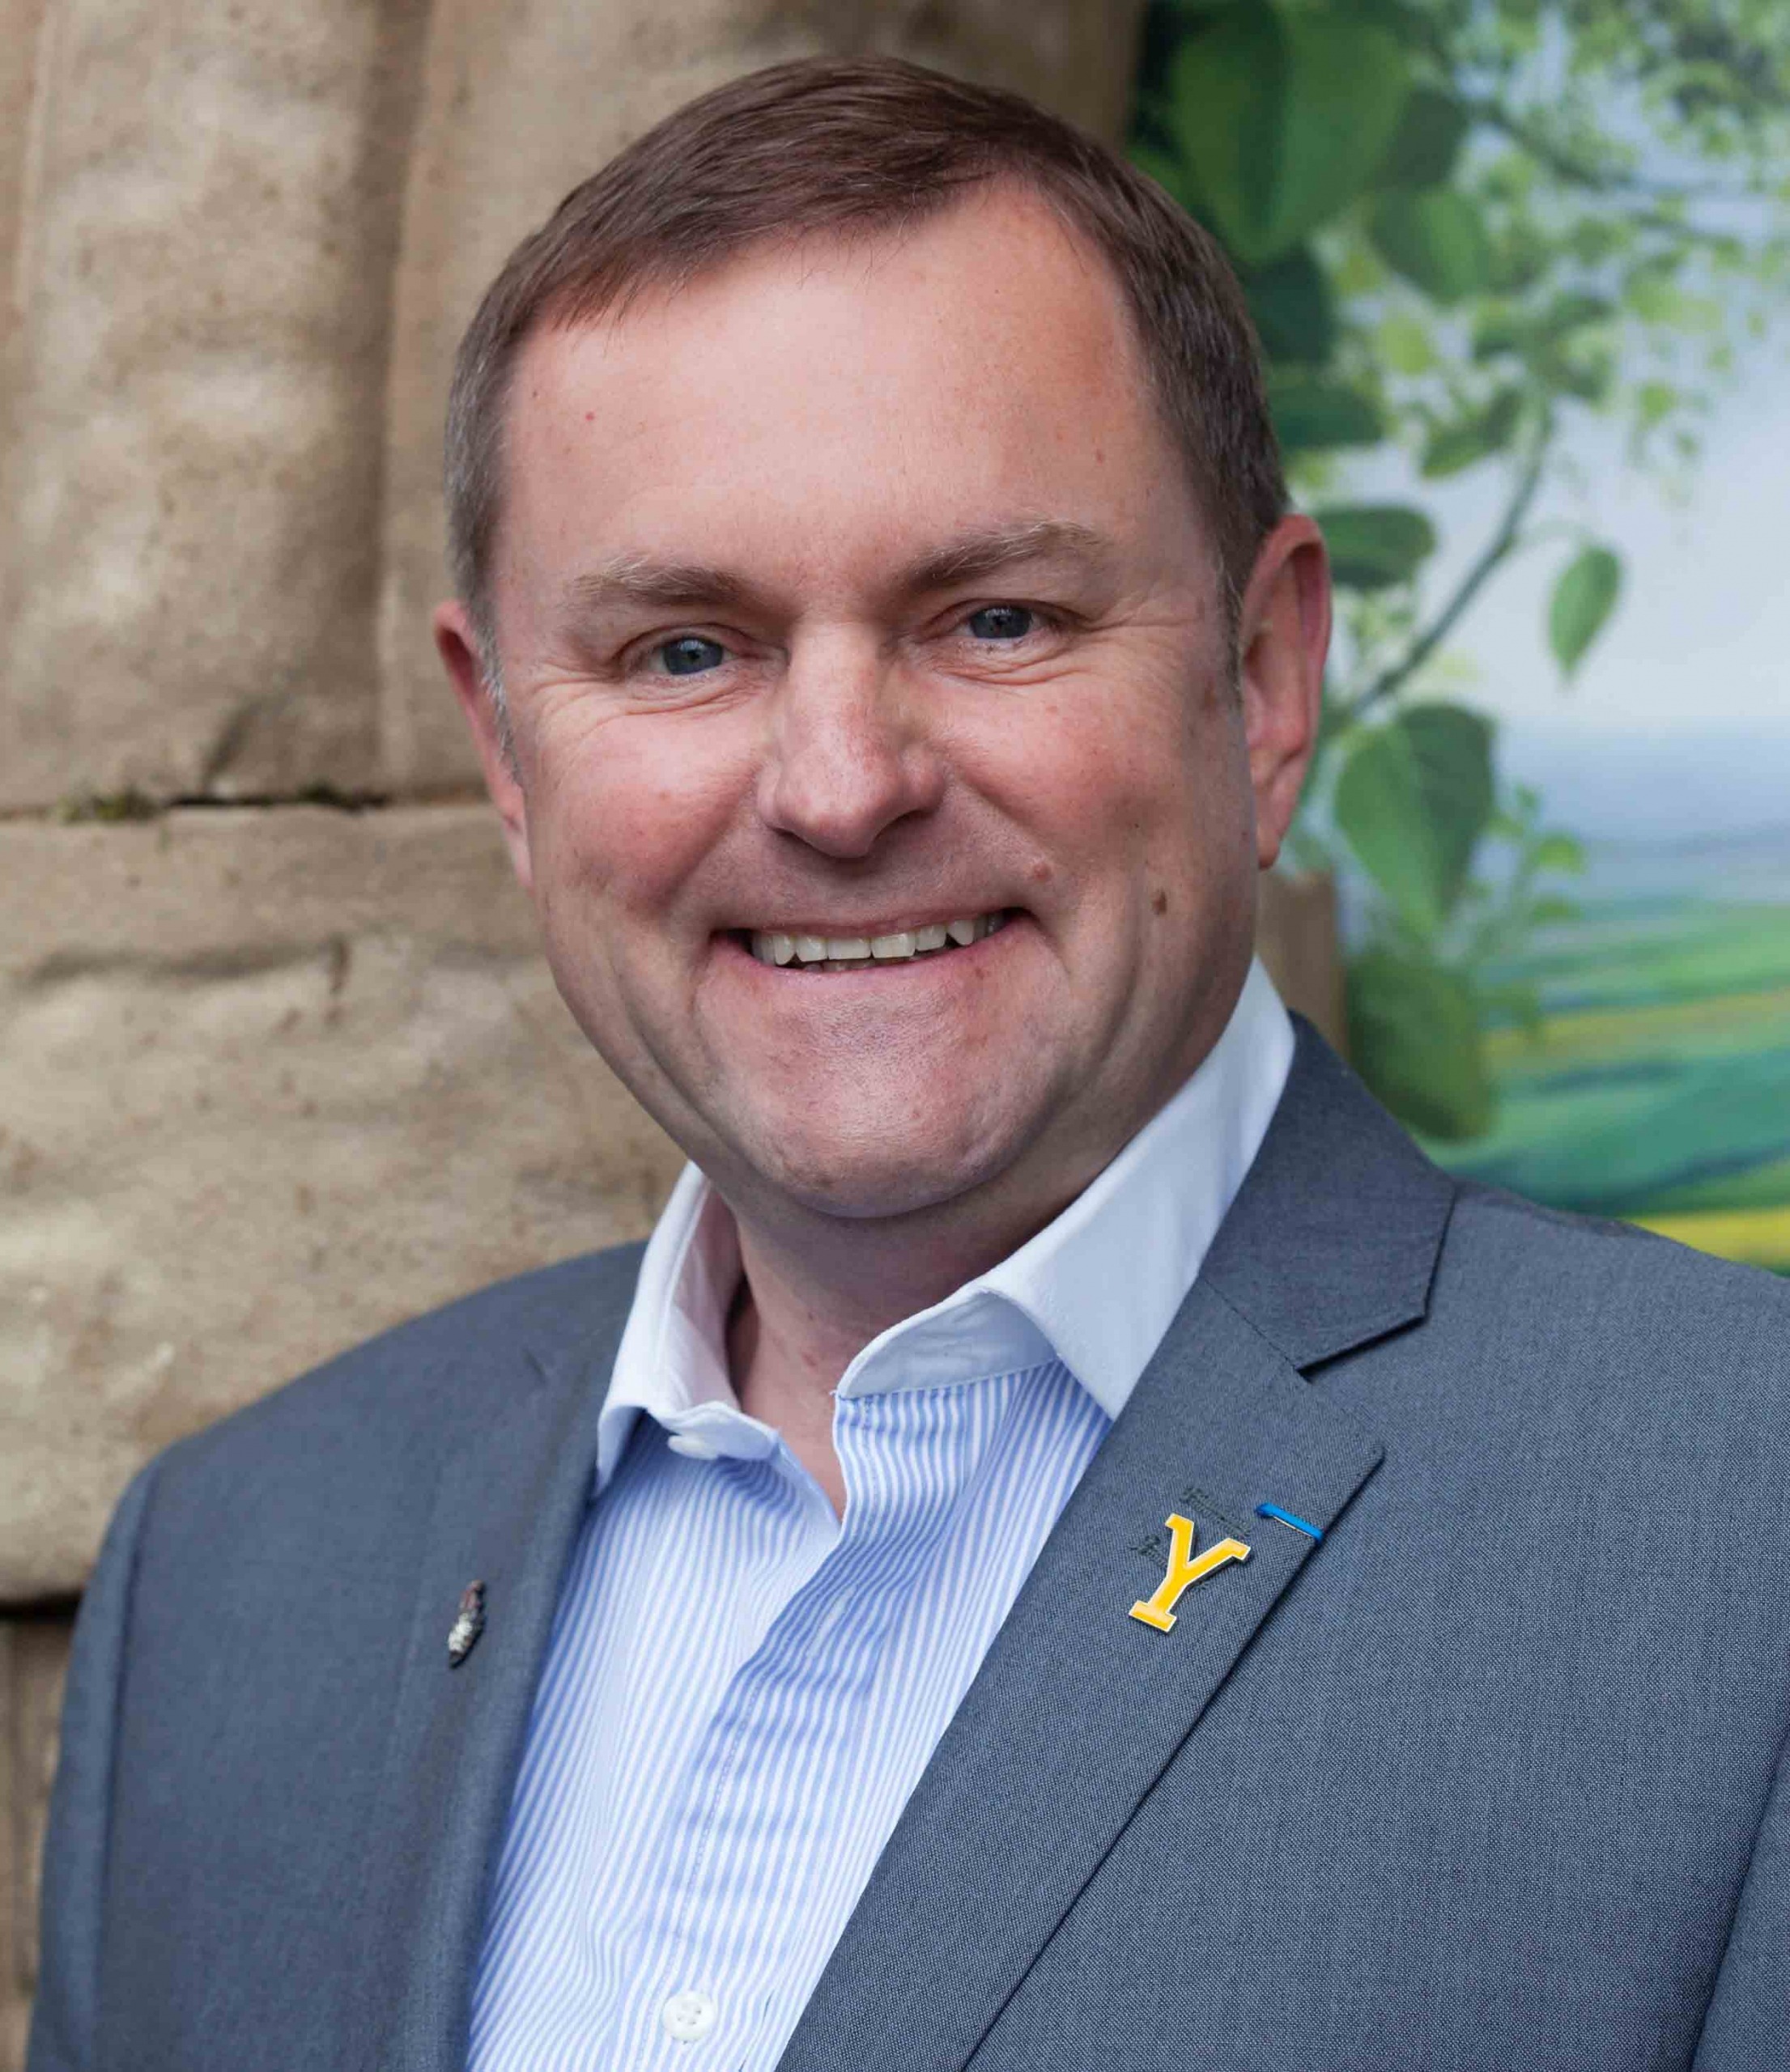 Sir Gary Keith Verity, DL is a British businessman and sheep farmer. He was Chief Executive of Welcome to Yorkshire from 2008 until he resigned in March 2019